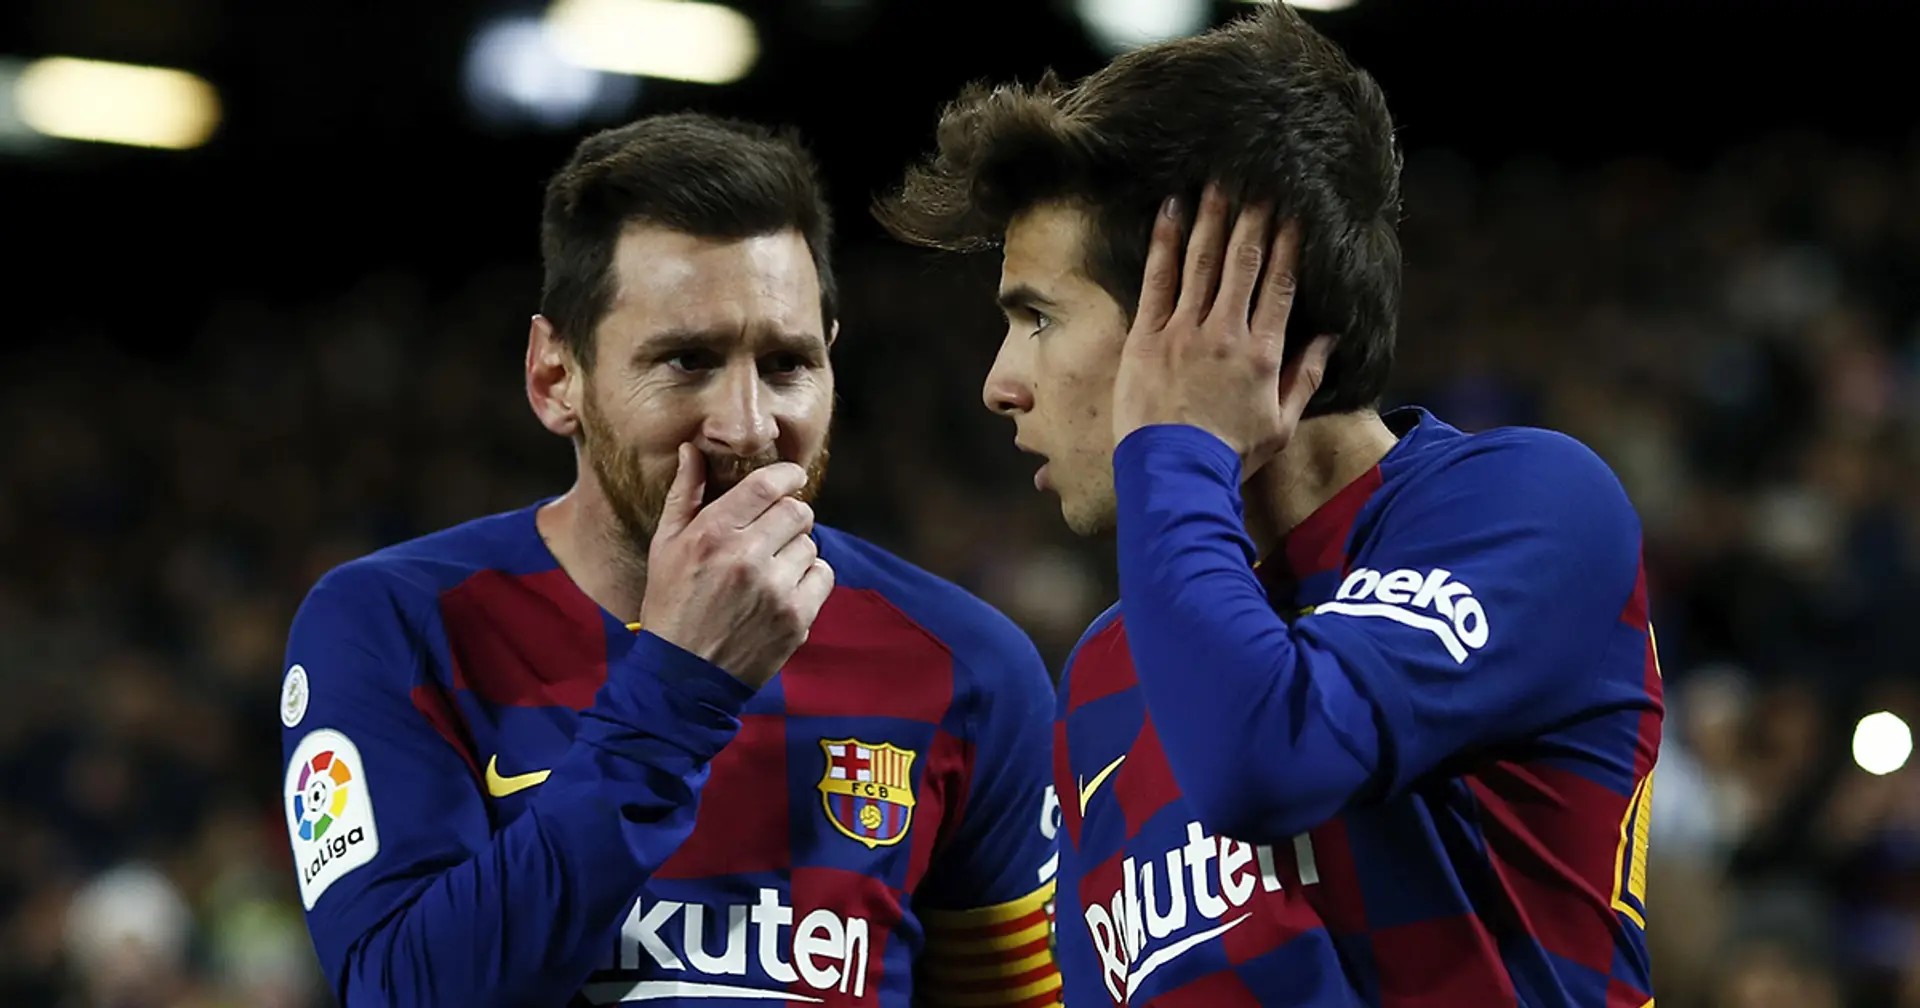 Messi and Puig among 17 world-class players free to talk to other clubs as things stand